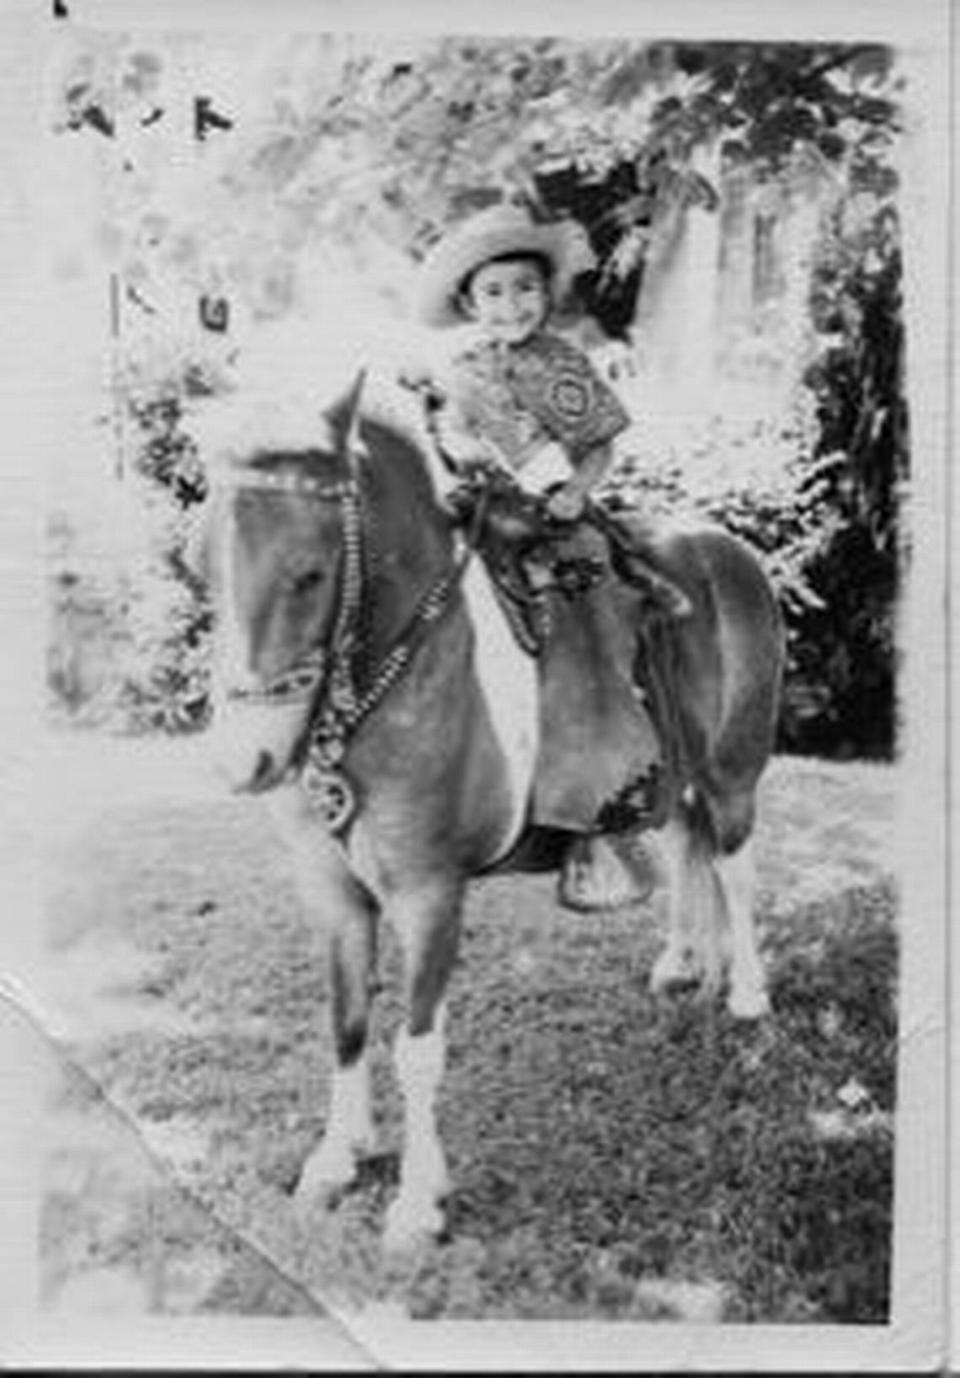 Rosemary Galdiano, 7, sits on a pony in front of her house on Drew Street, 1962. She recalls her neighborhood was riddled with gang violence in the 1970s.